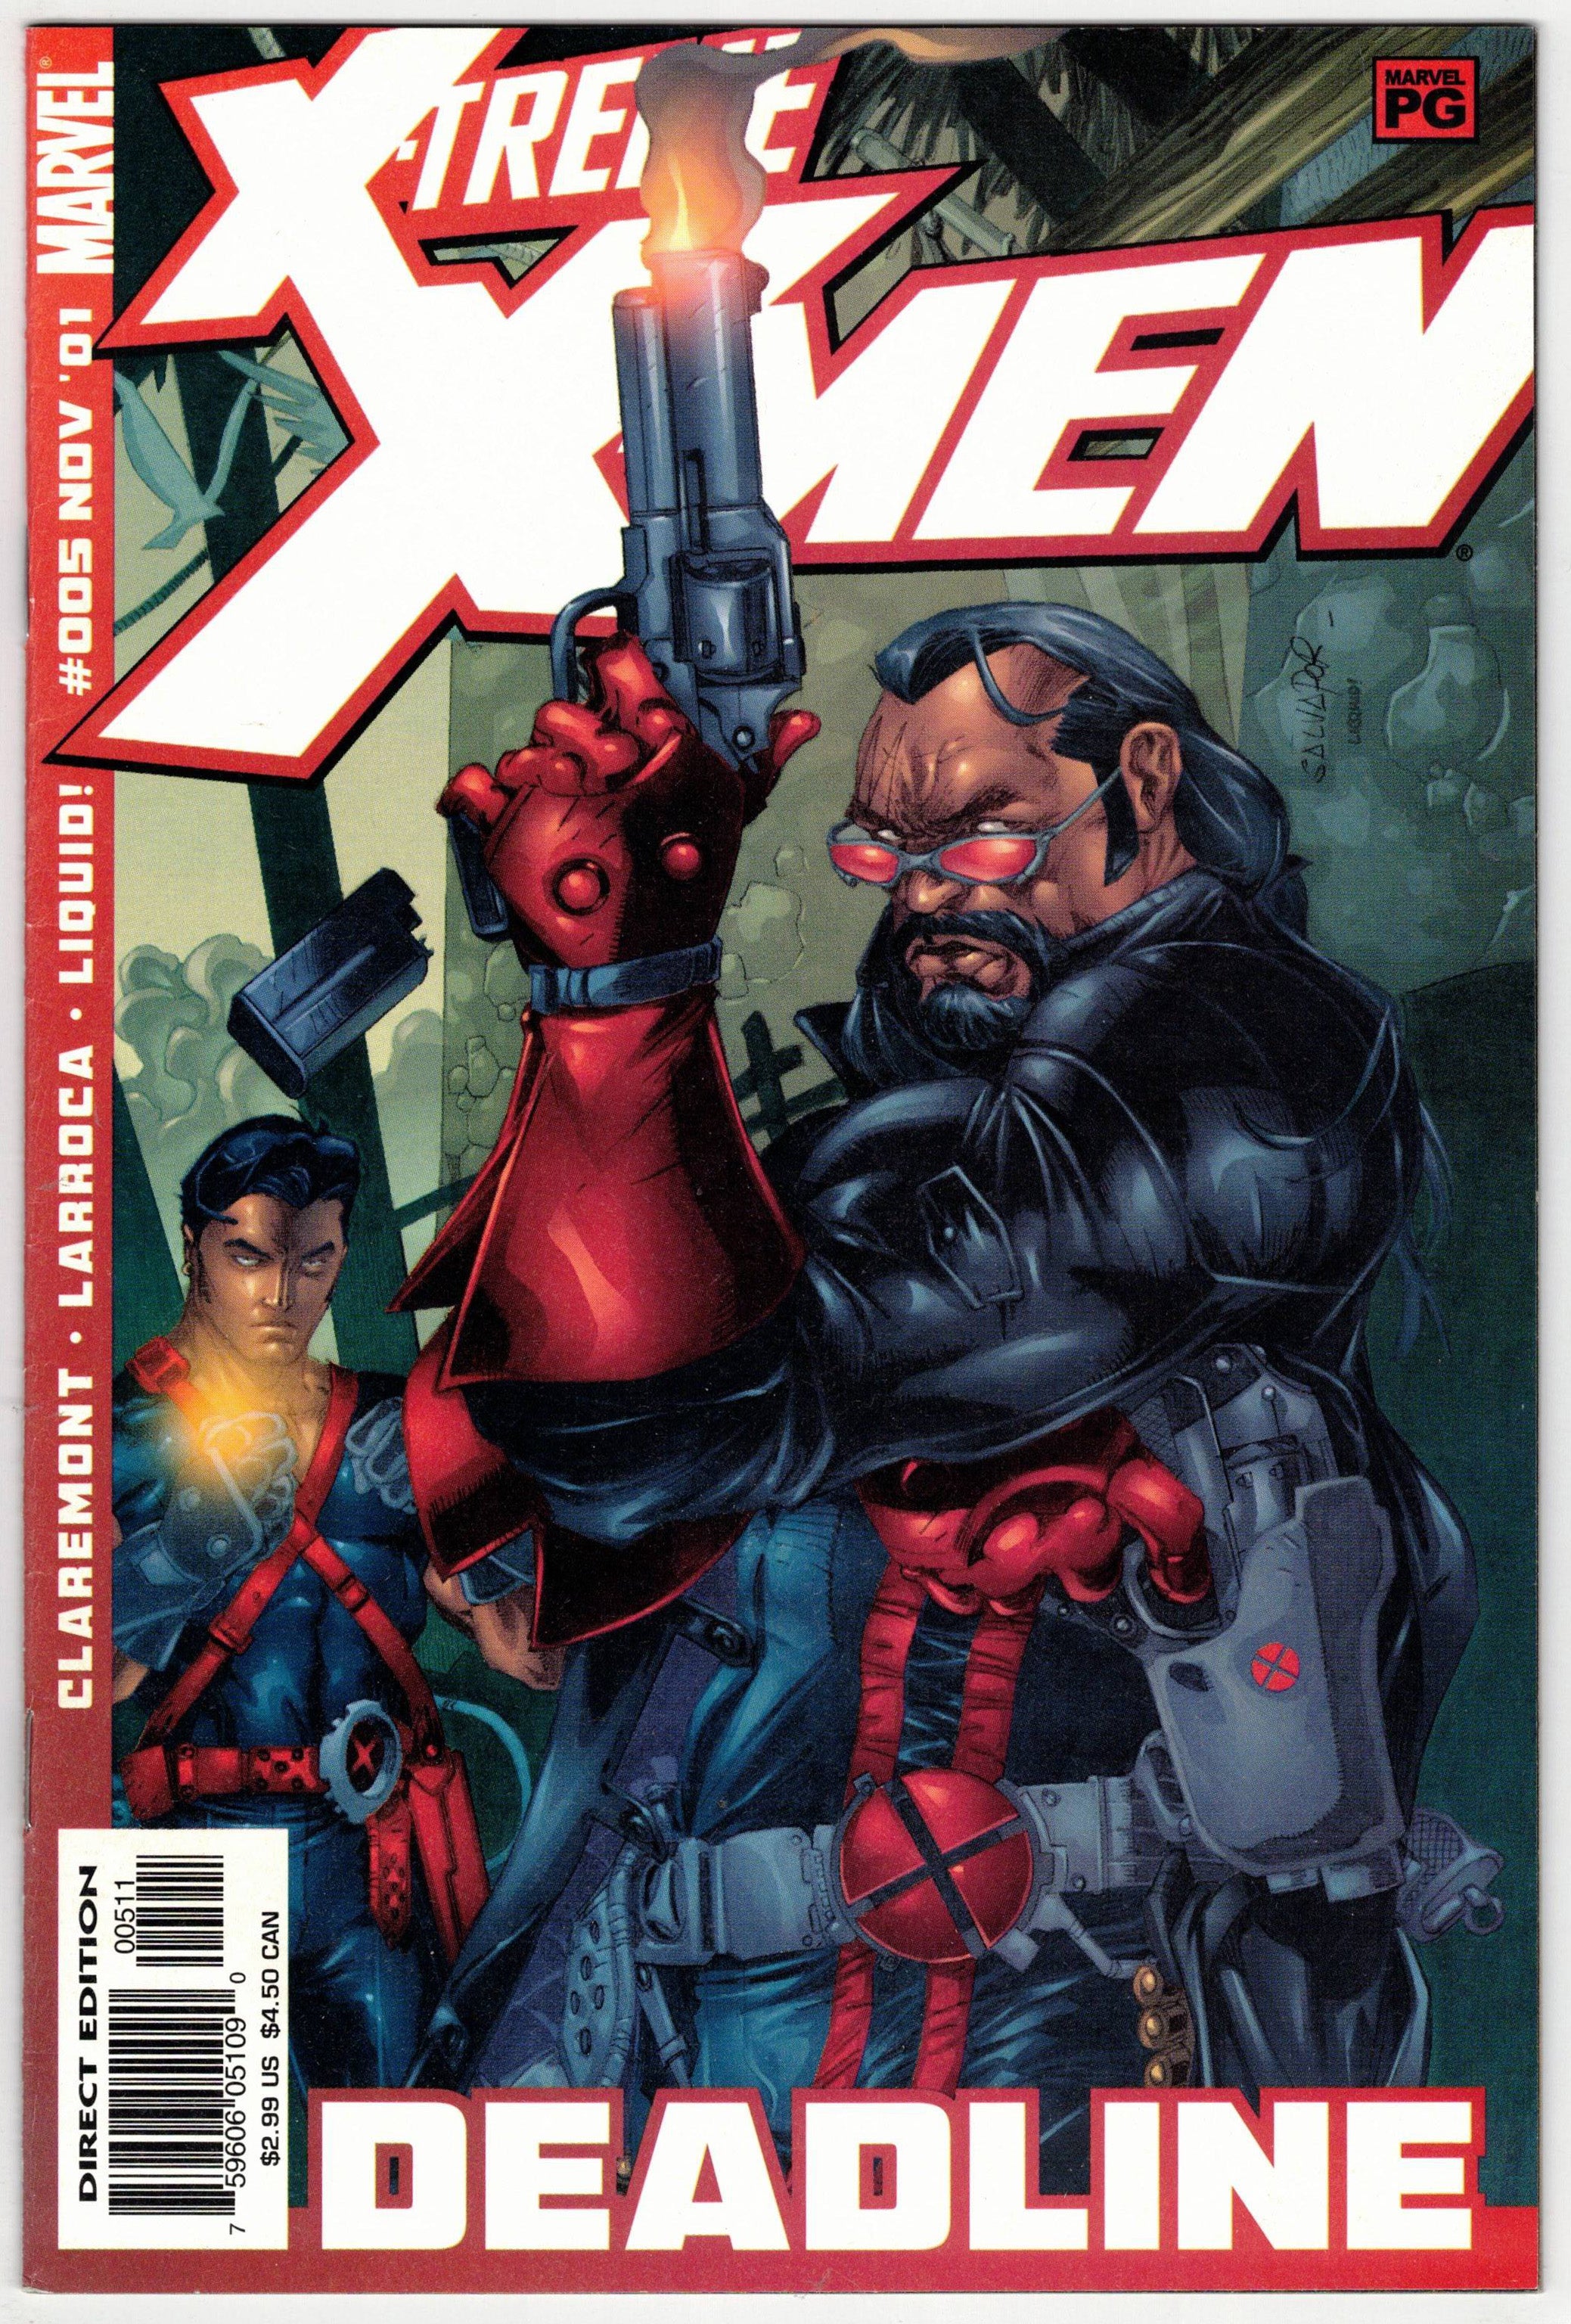 Photo of X-Treme X-Men, Vol. 1 (2001) Issue 5A - Near Mint Comic sold by Stronghold Collectibles